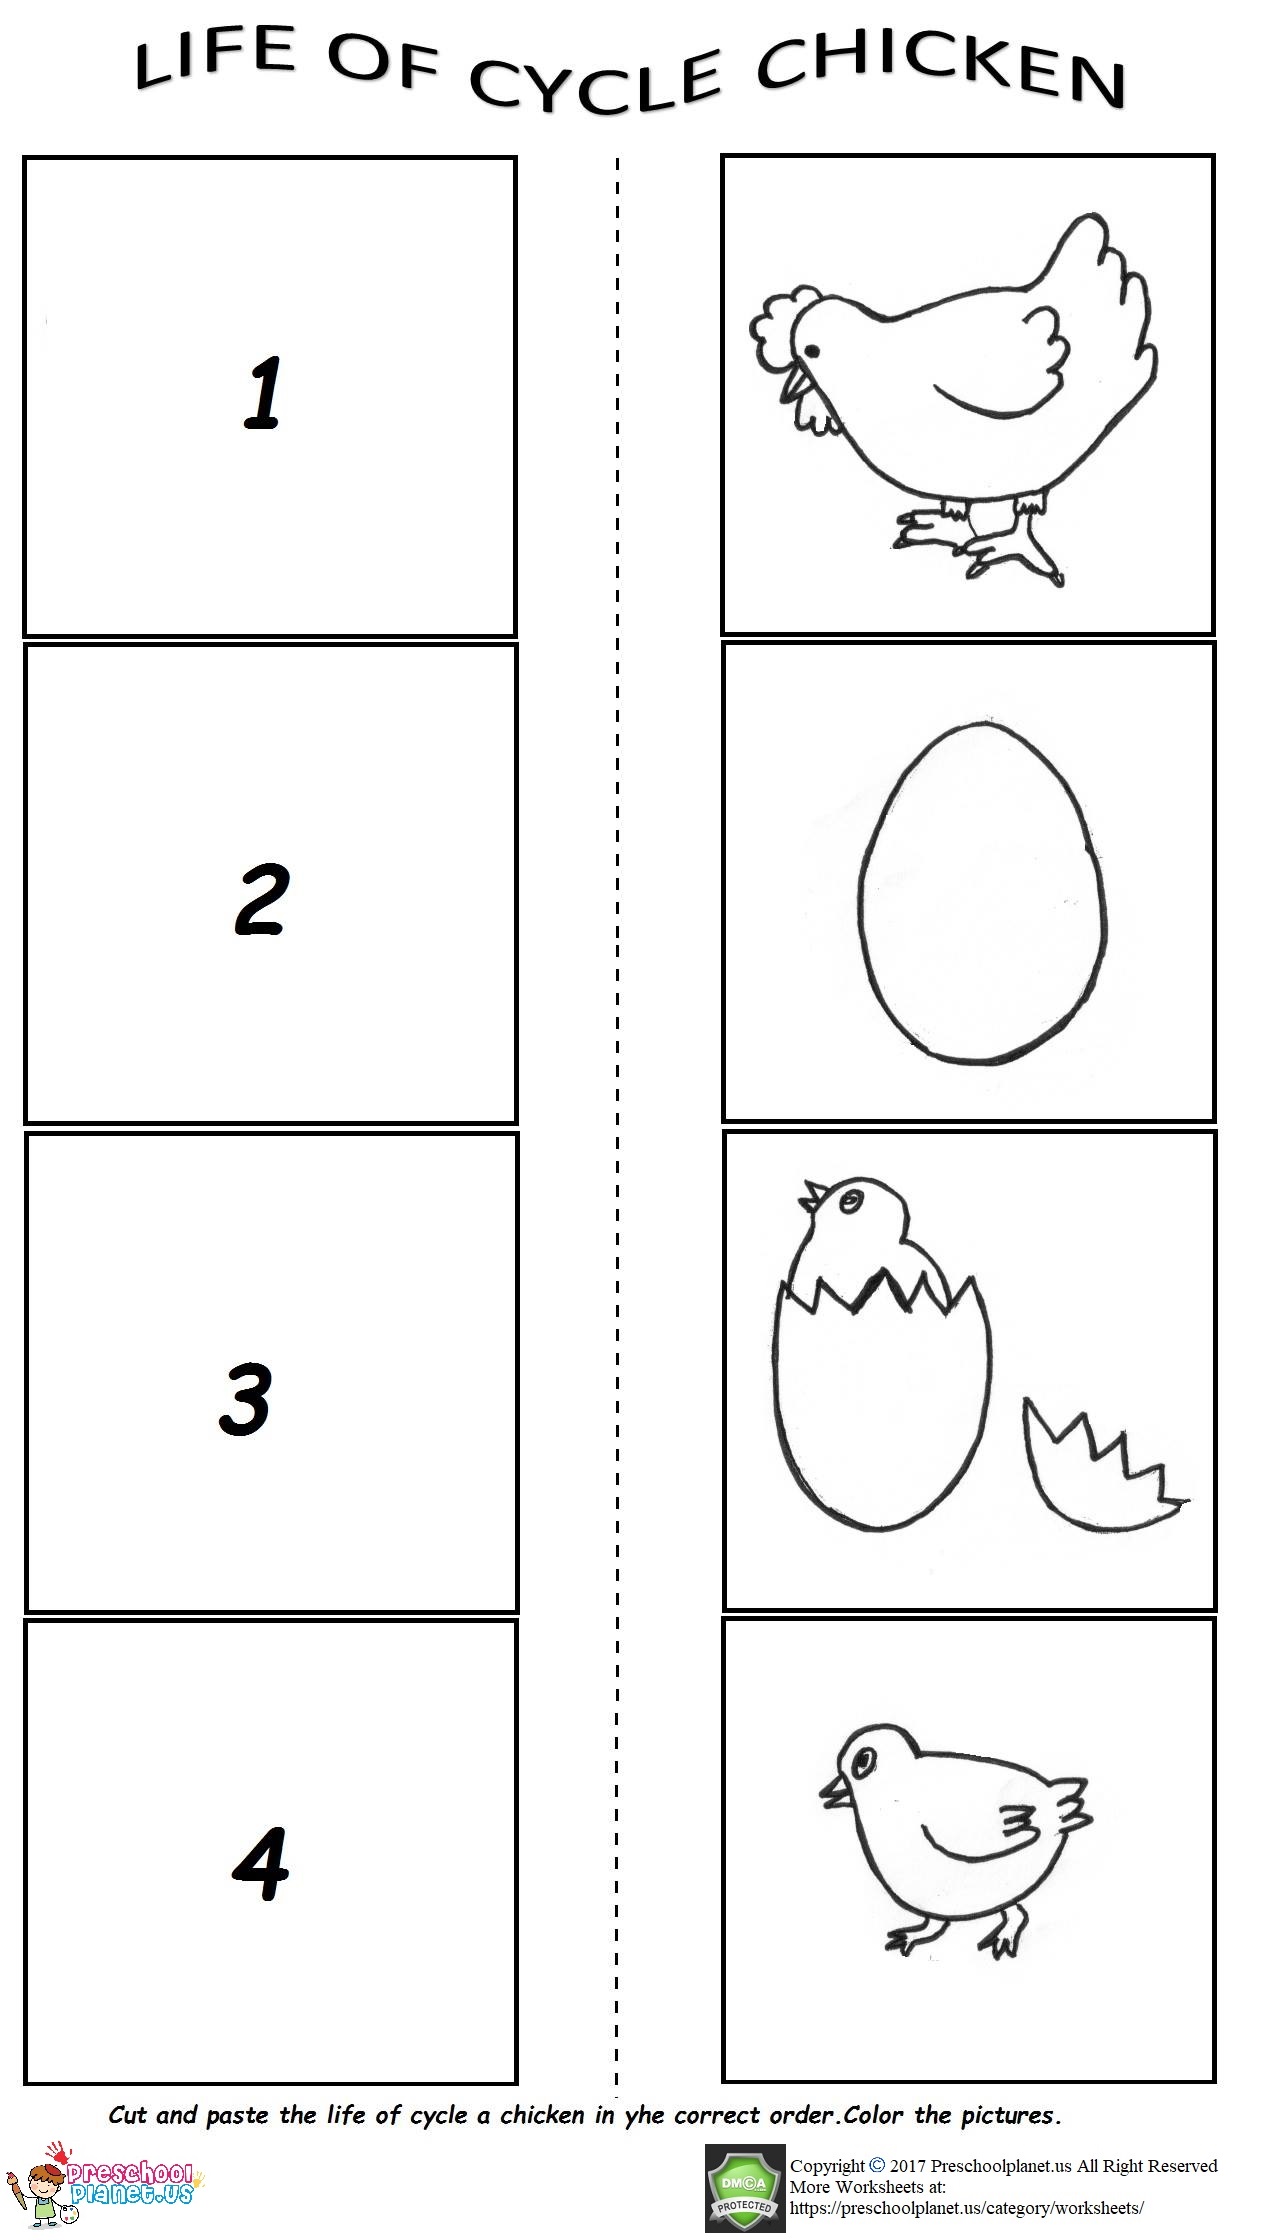 the-life-cycle-of-a-chicken-worksheet-preschoolplanet